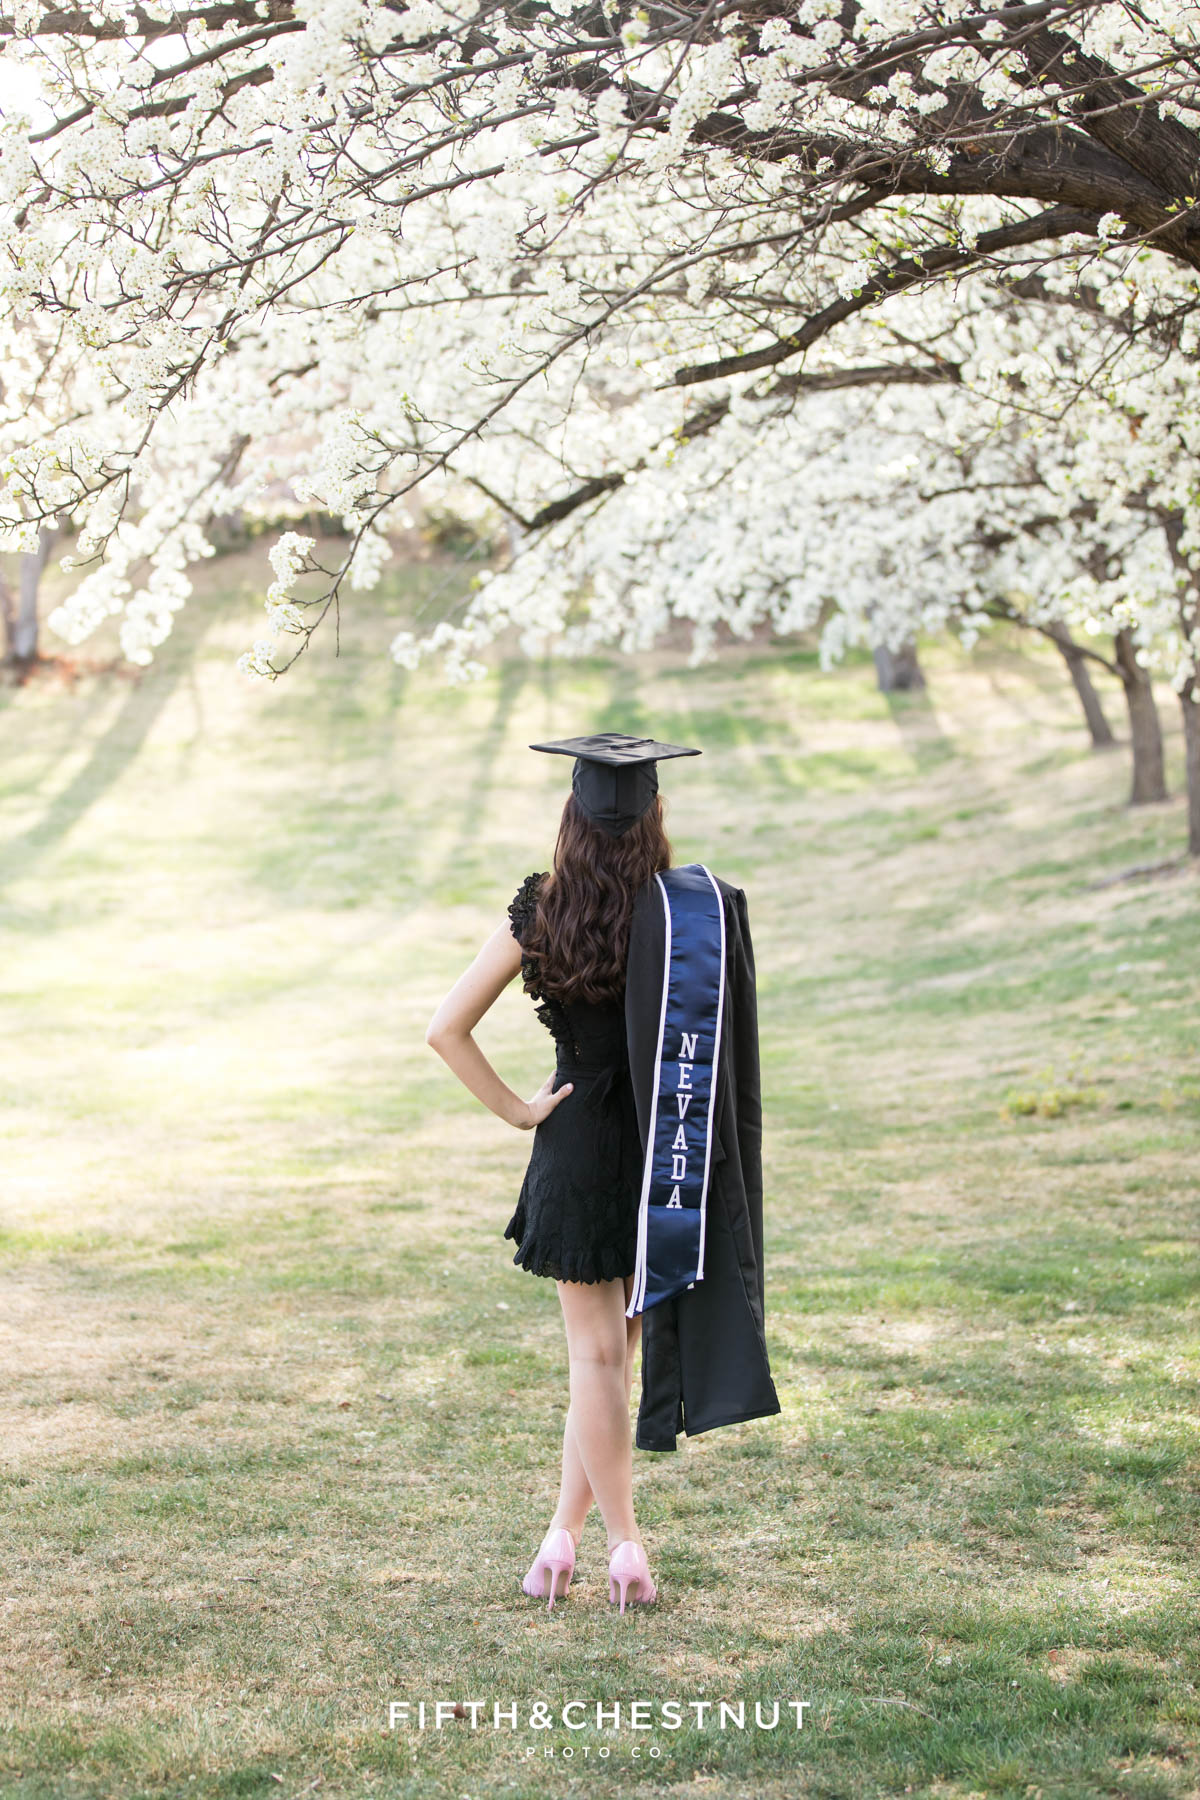 A UNR graduate stands with her back turned on an expansive lawn surrounded by white blossom trees for her spring UNR graduation portraits